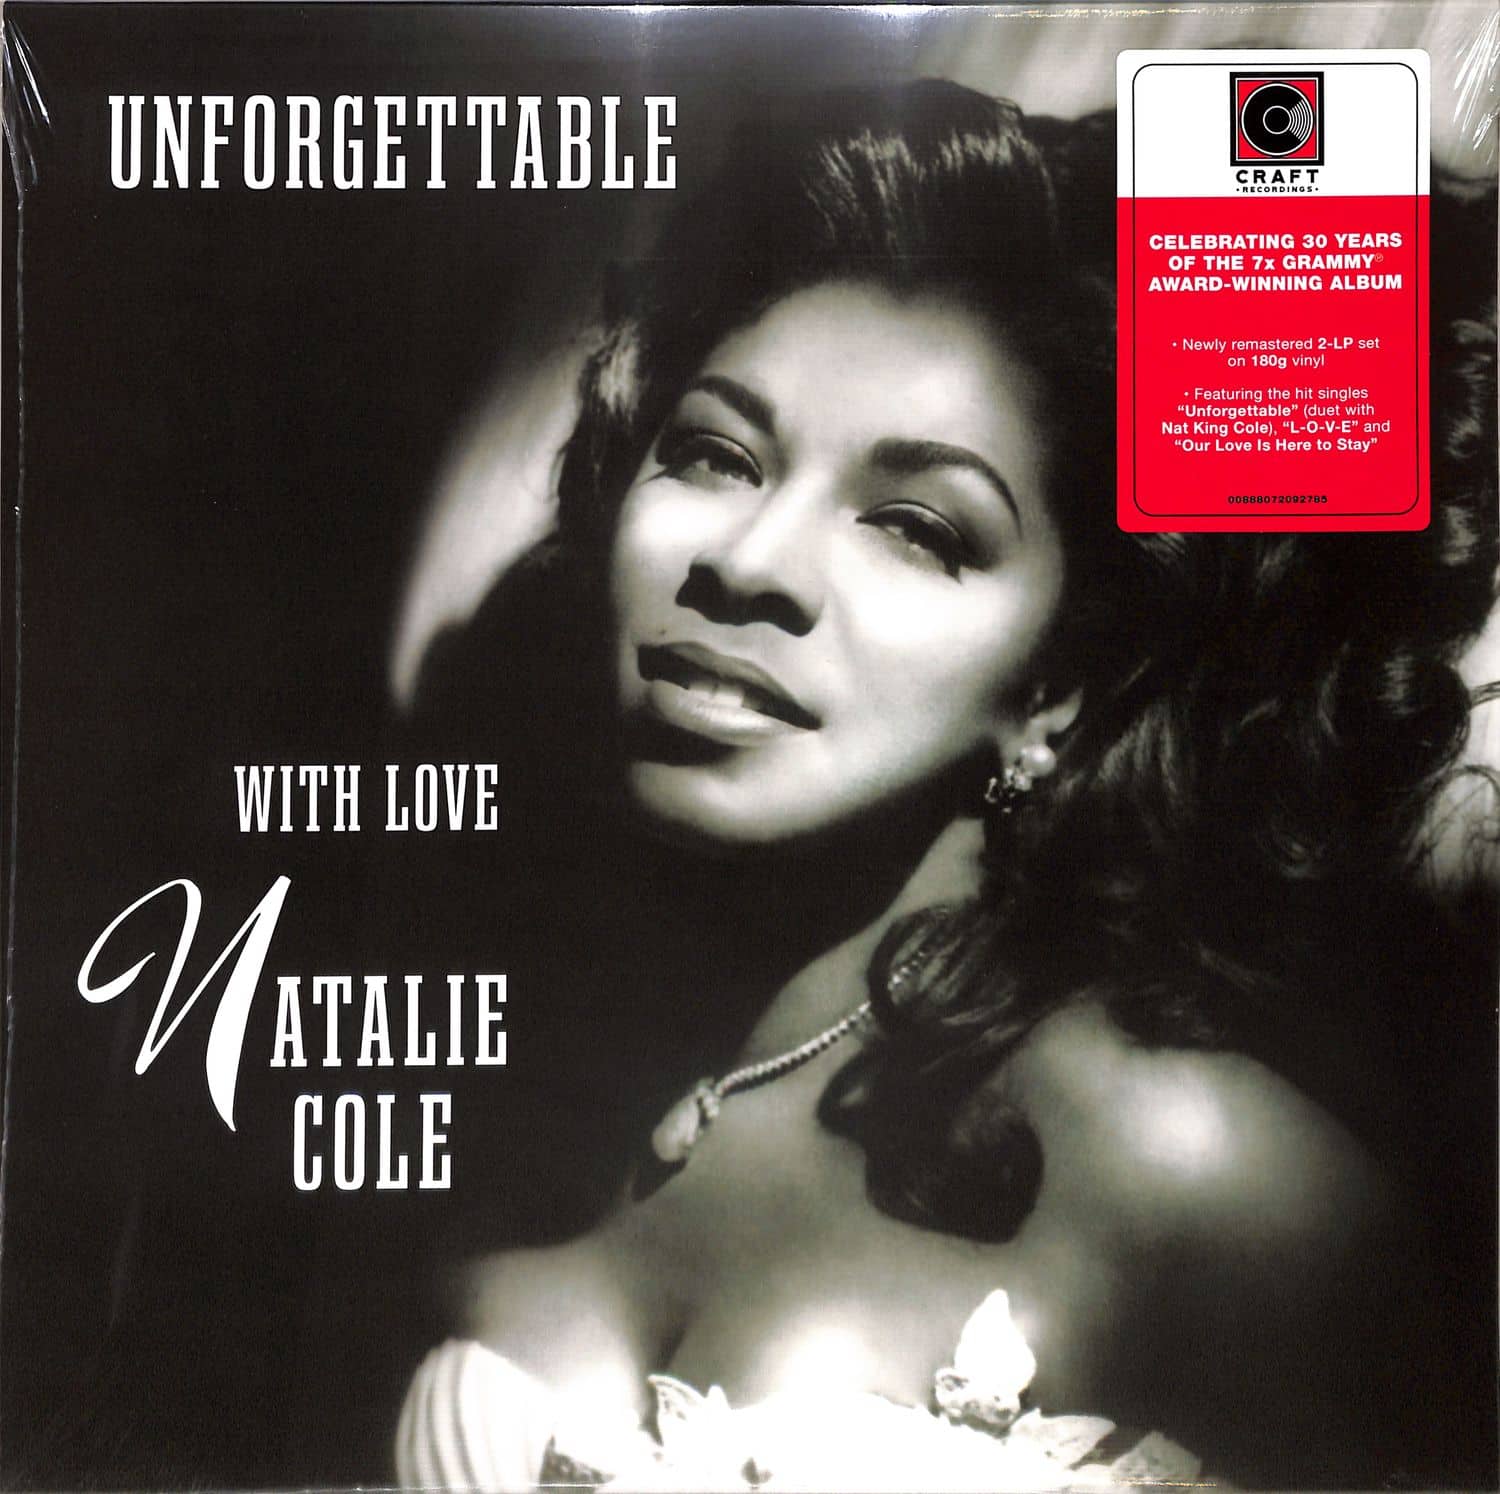 Natalie Cole - UNFORGETTABLE? WITH LOVE 